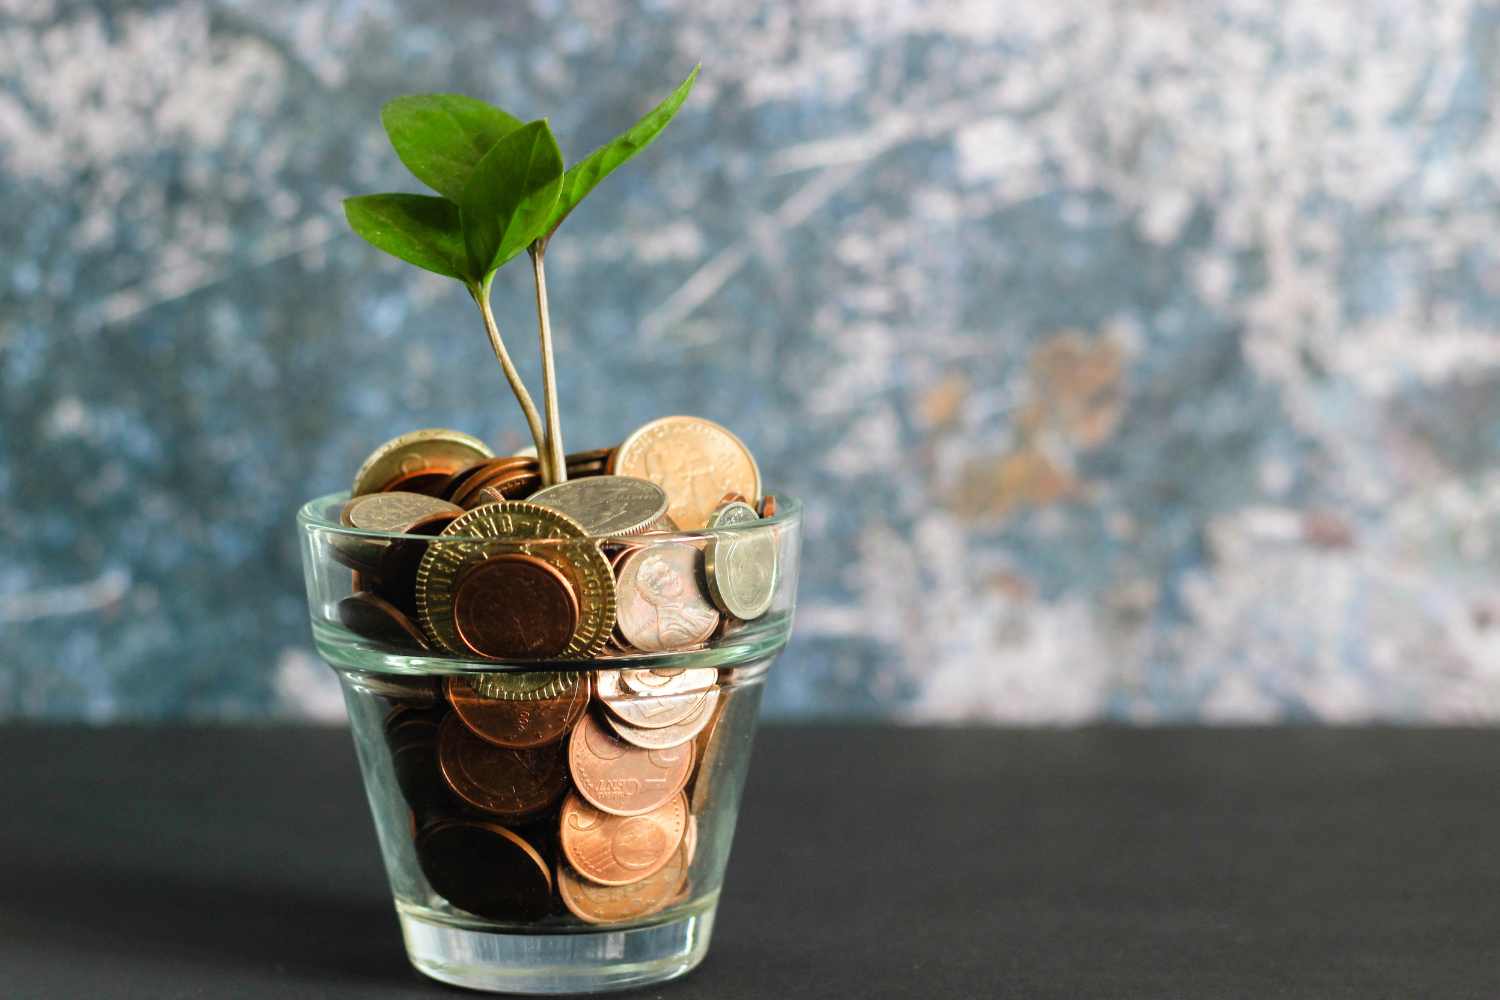 a glass jar filled with various coins and a seedling emerging from it. 